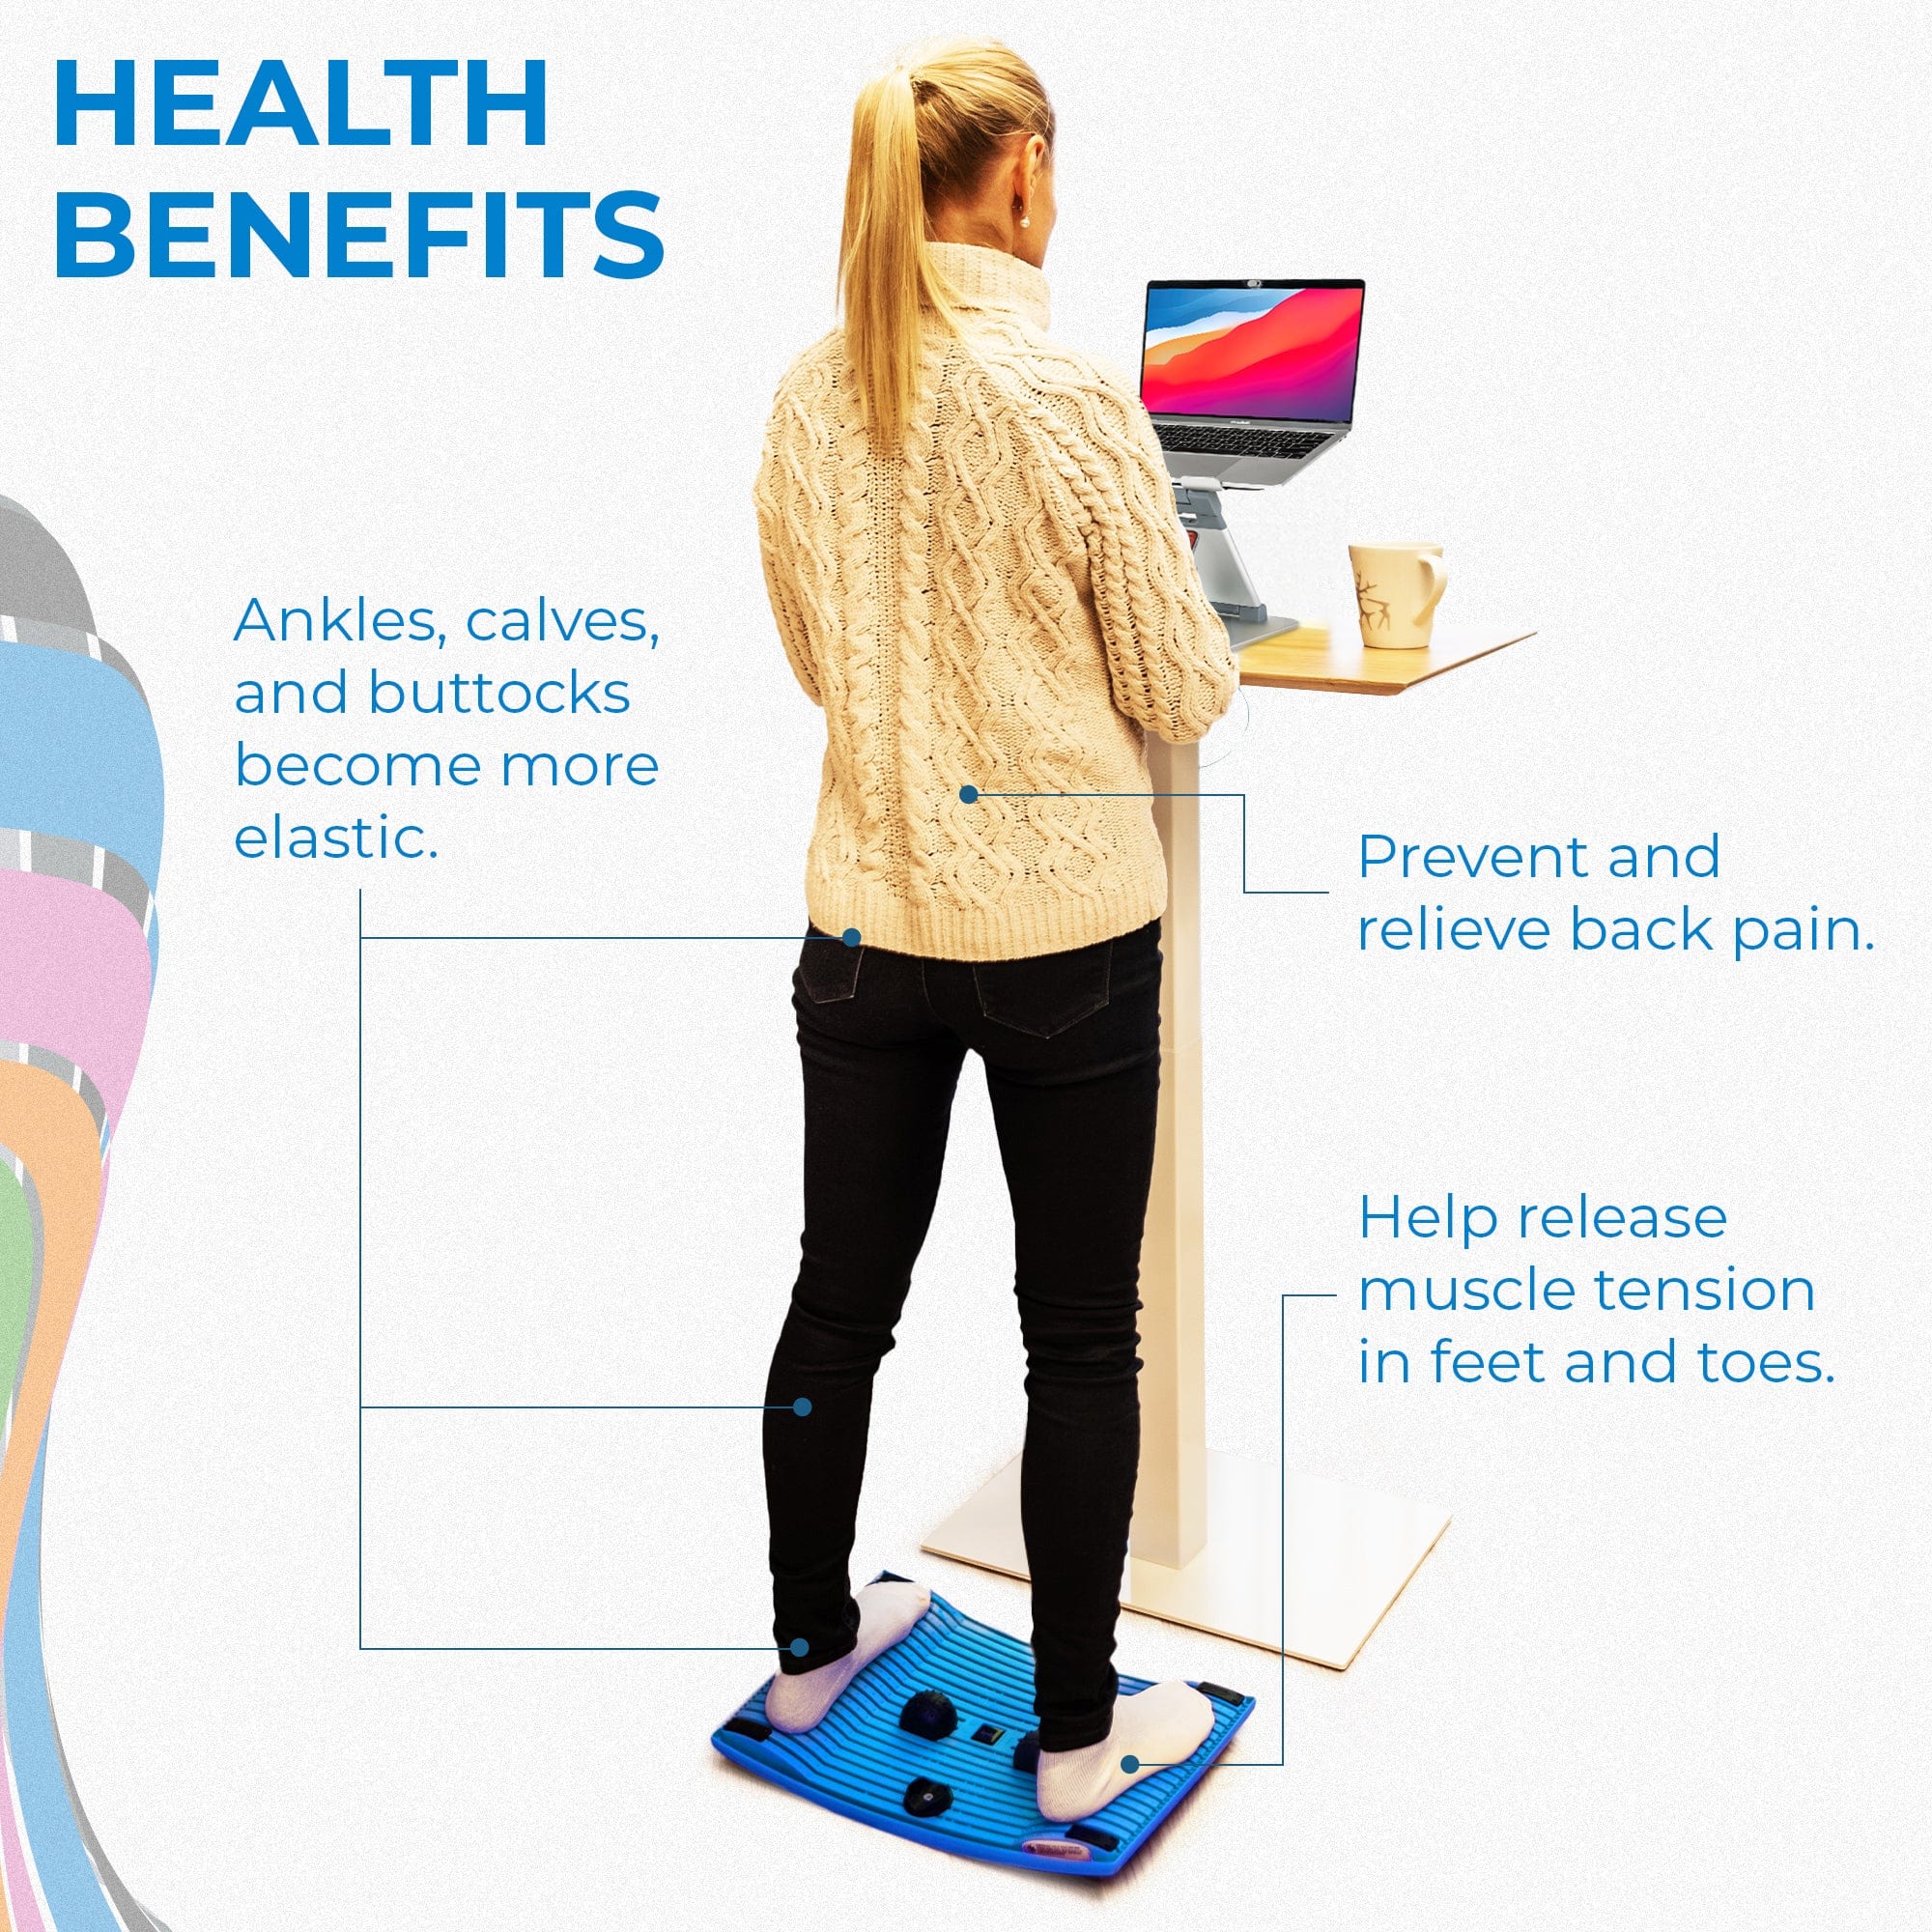 Woman standing on Gymba Active Board with text showing Benefits of standing desk